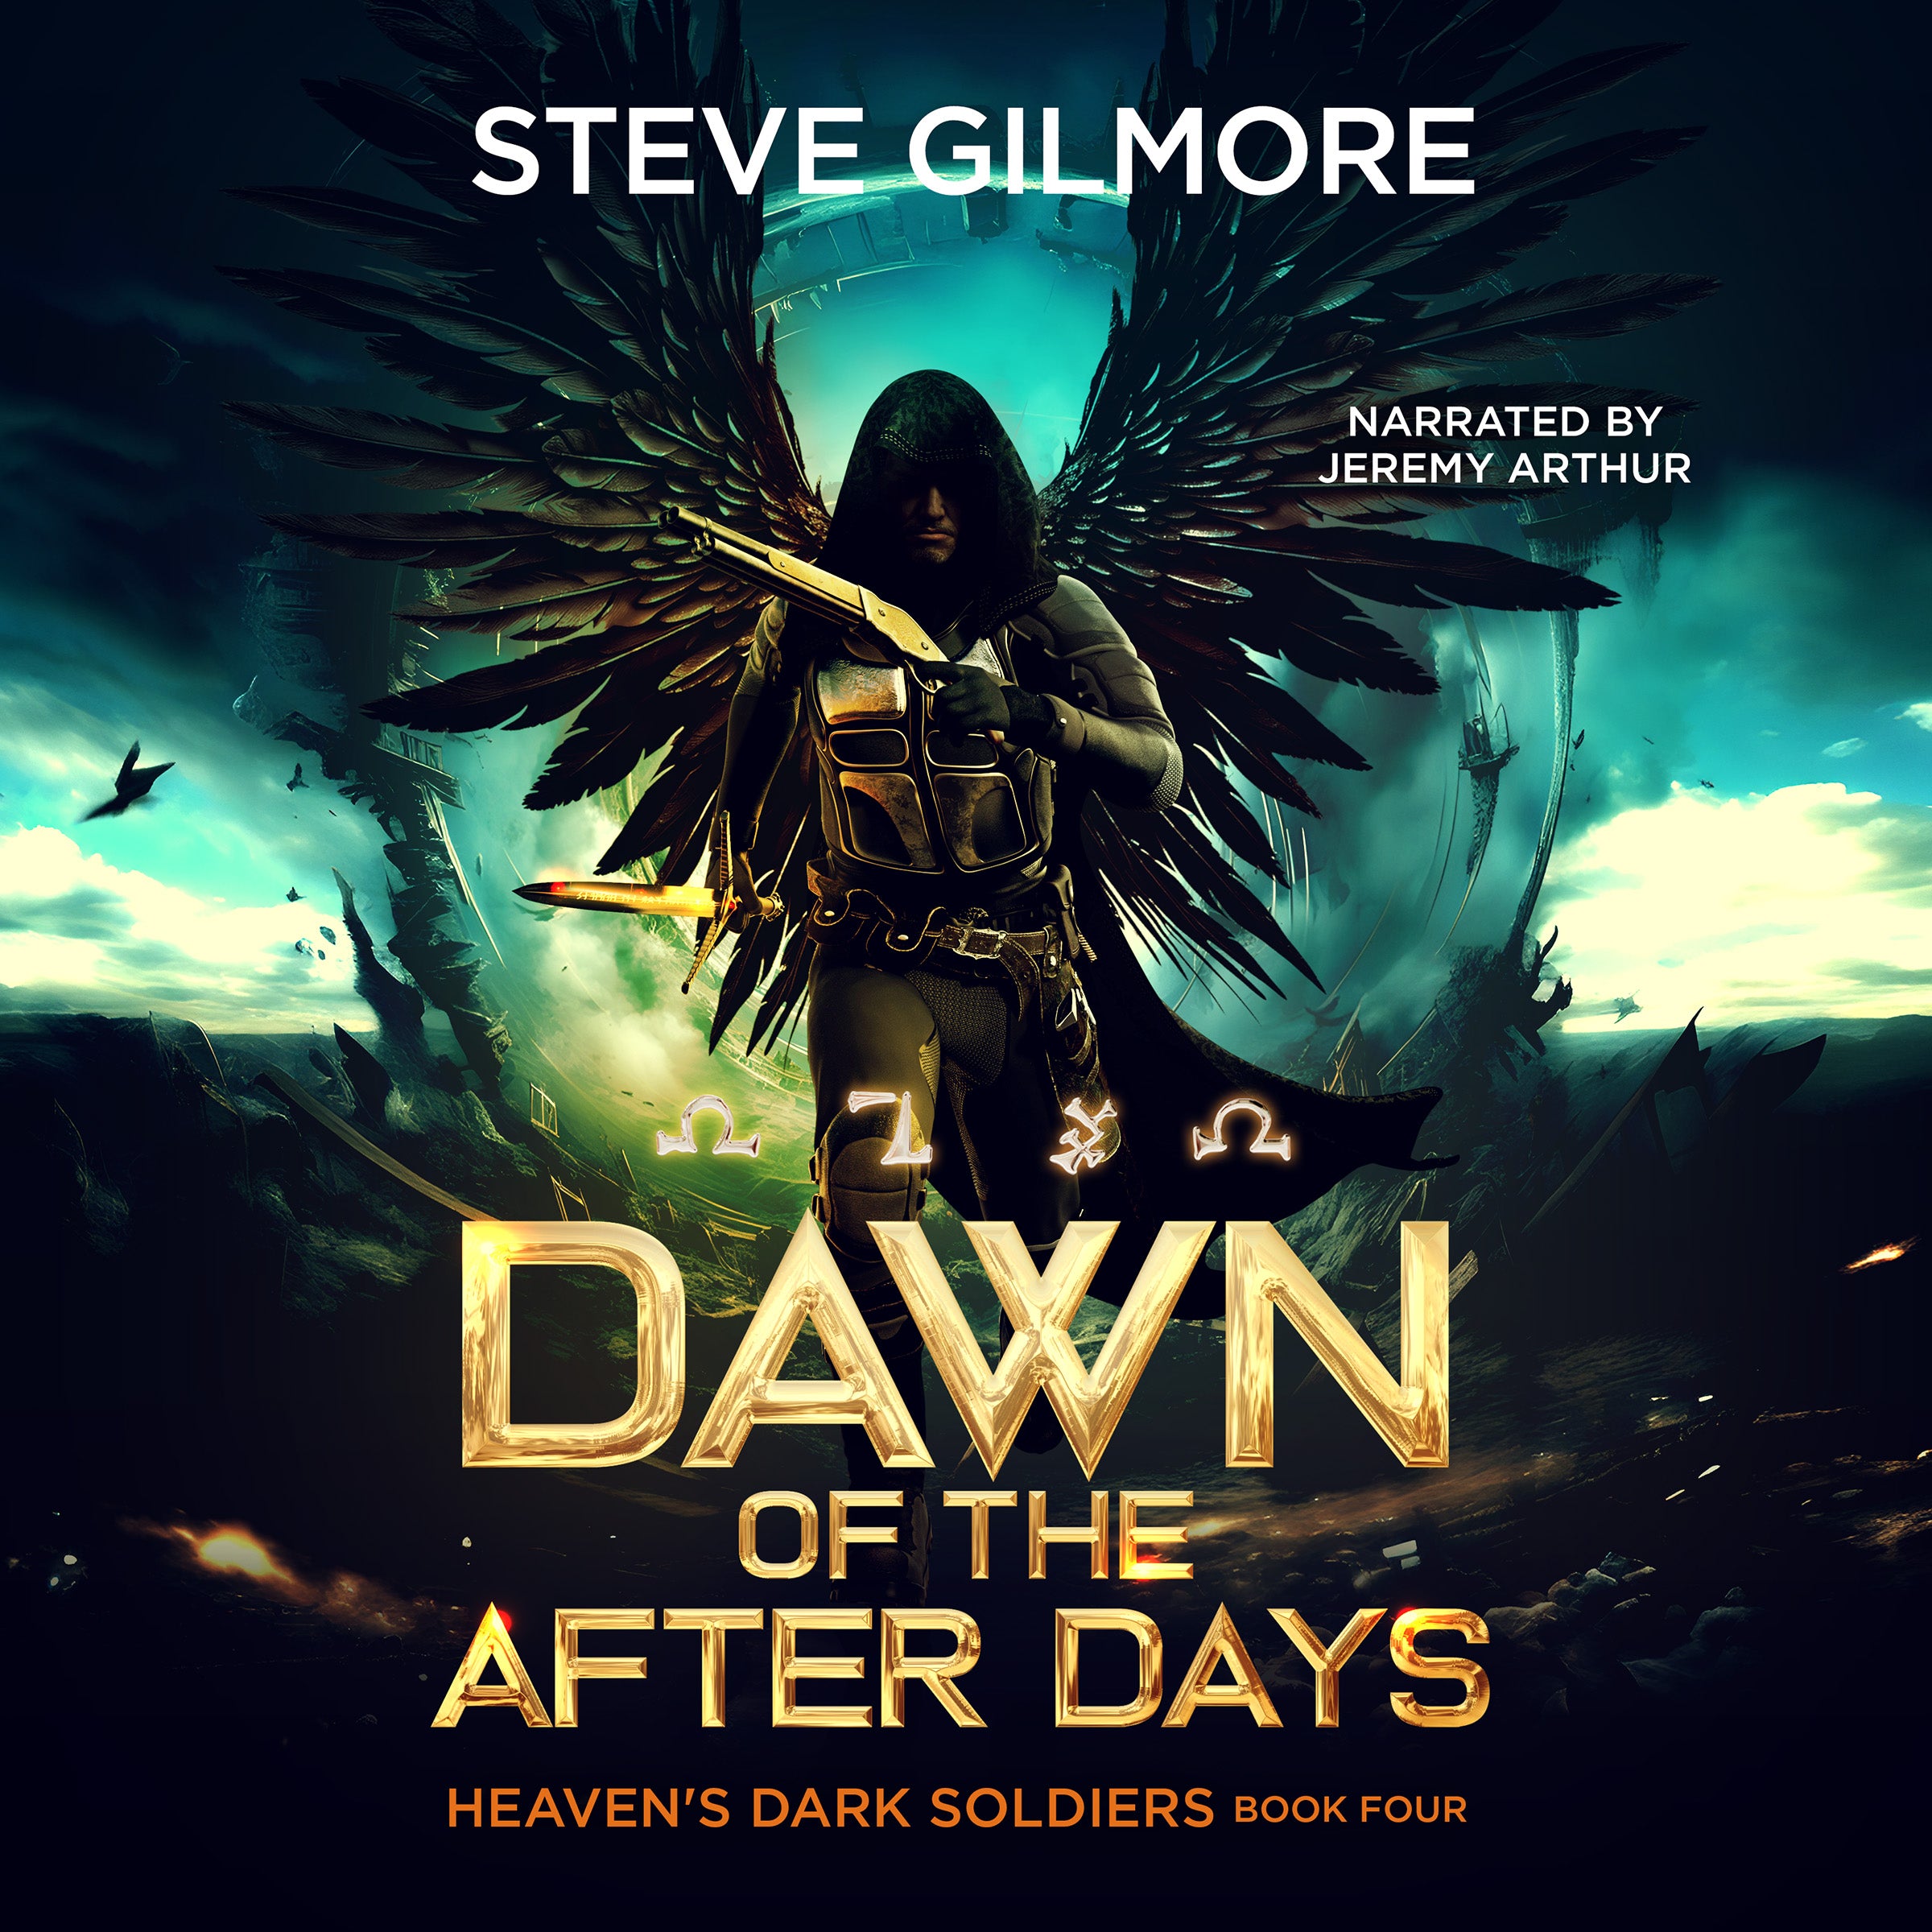 Dawn of the After Days (Heaven's Dark Soldiers Book 4) Audiobook Narrated by Jeremy Arthur